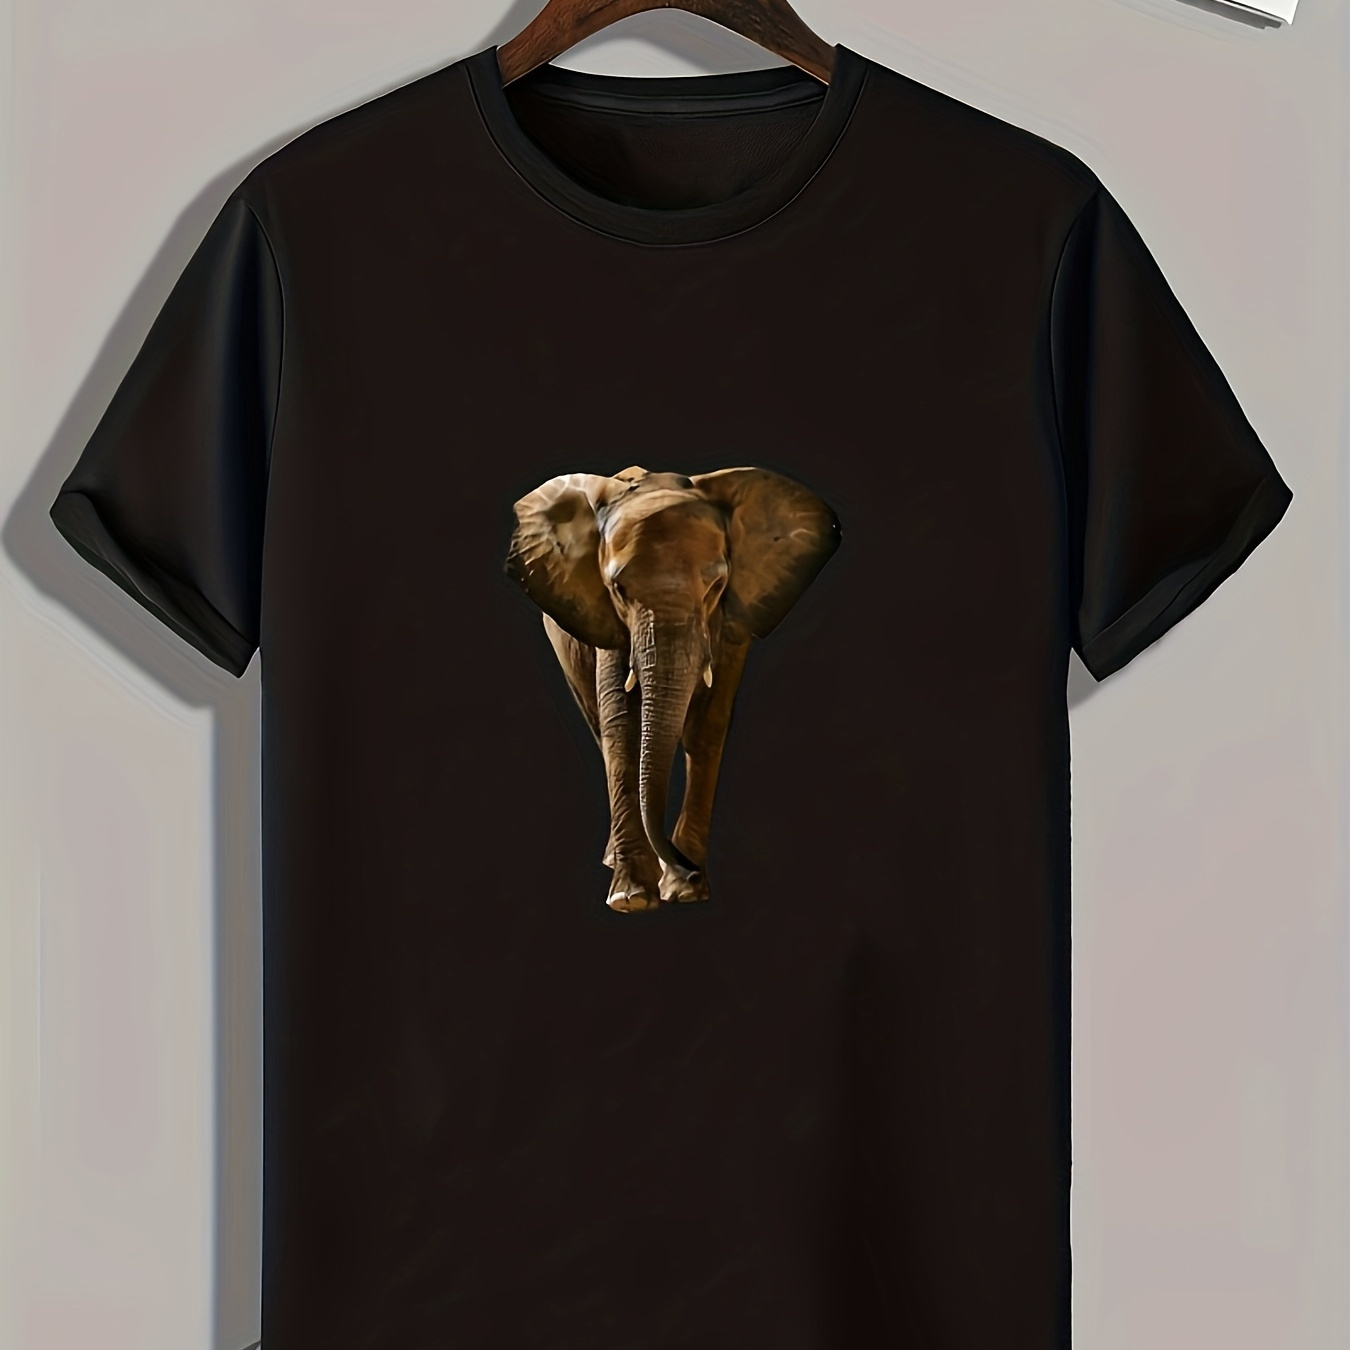 

Elephant Print, Men's Graphic T-shirt, Casual Comfy Tees For Summer, Mens Clothing